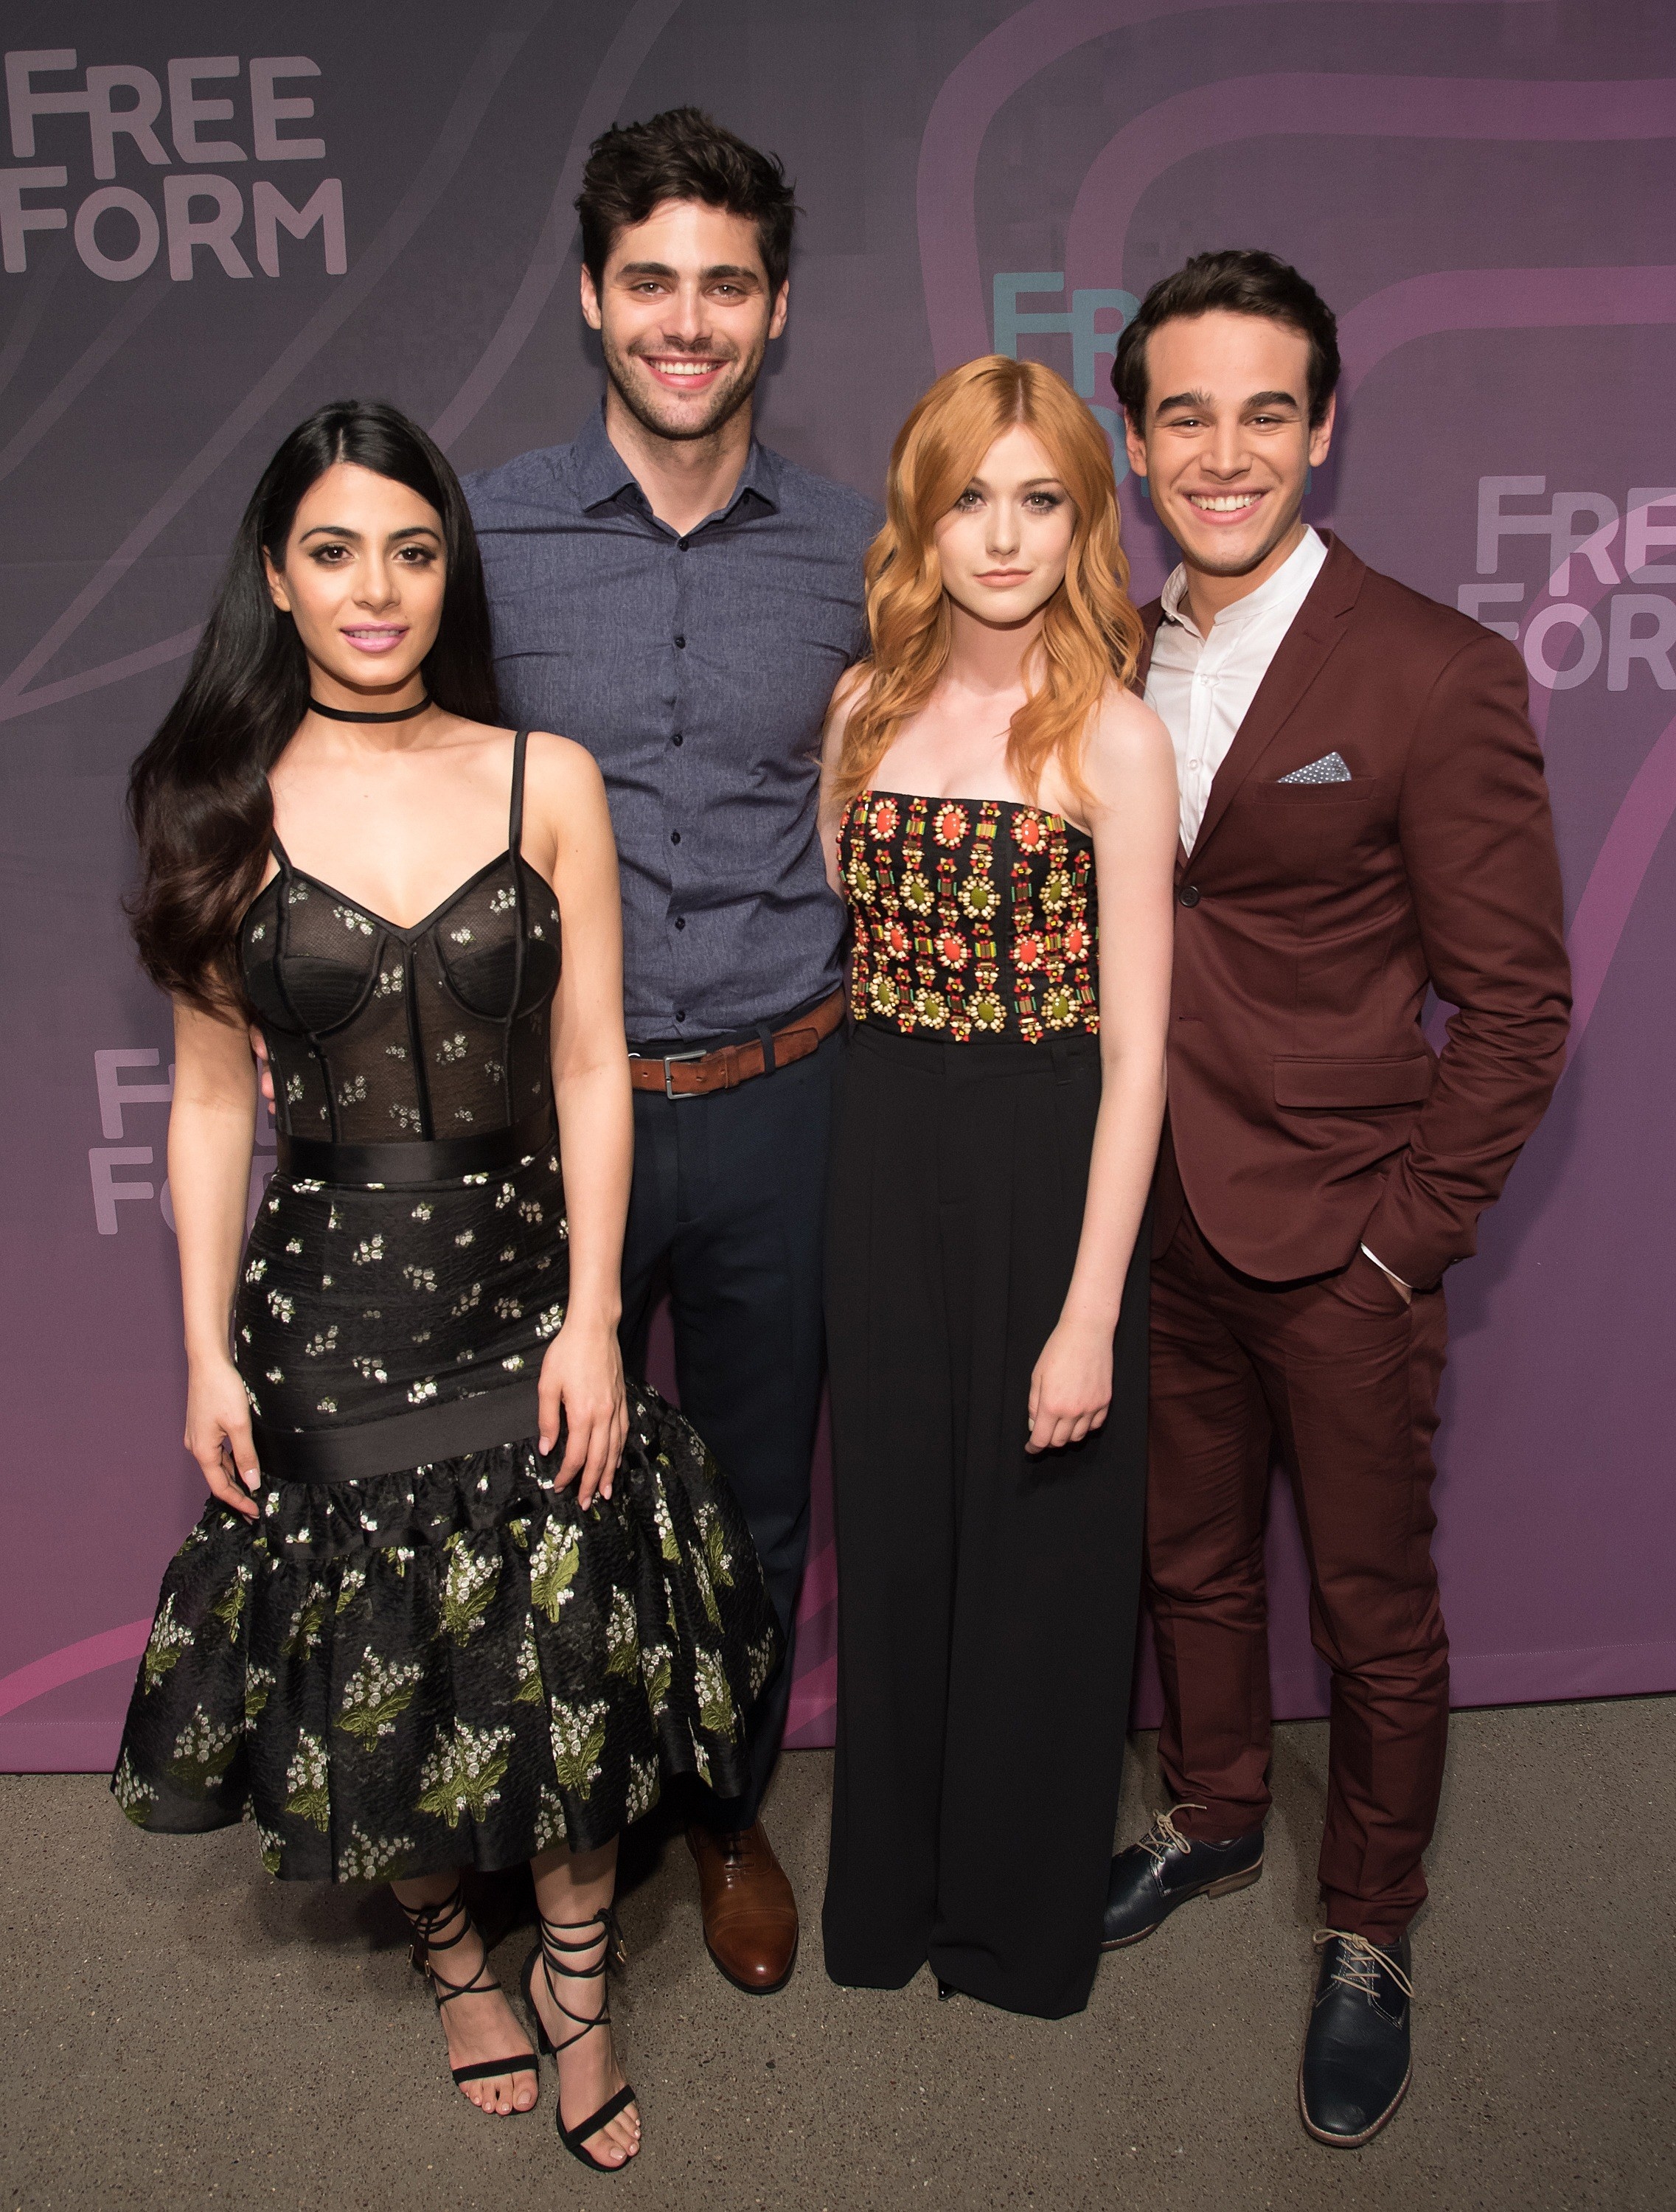 Matthew Daddario and others